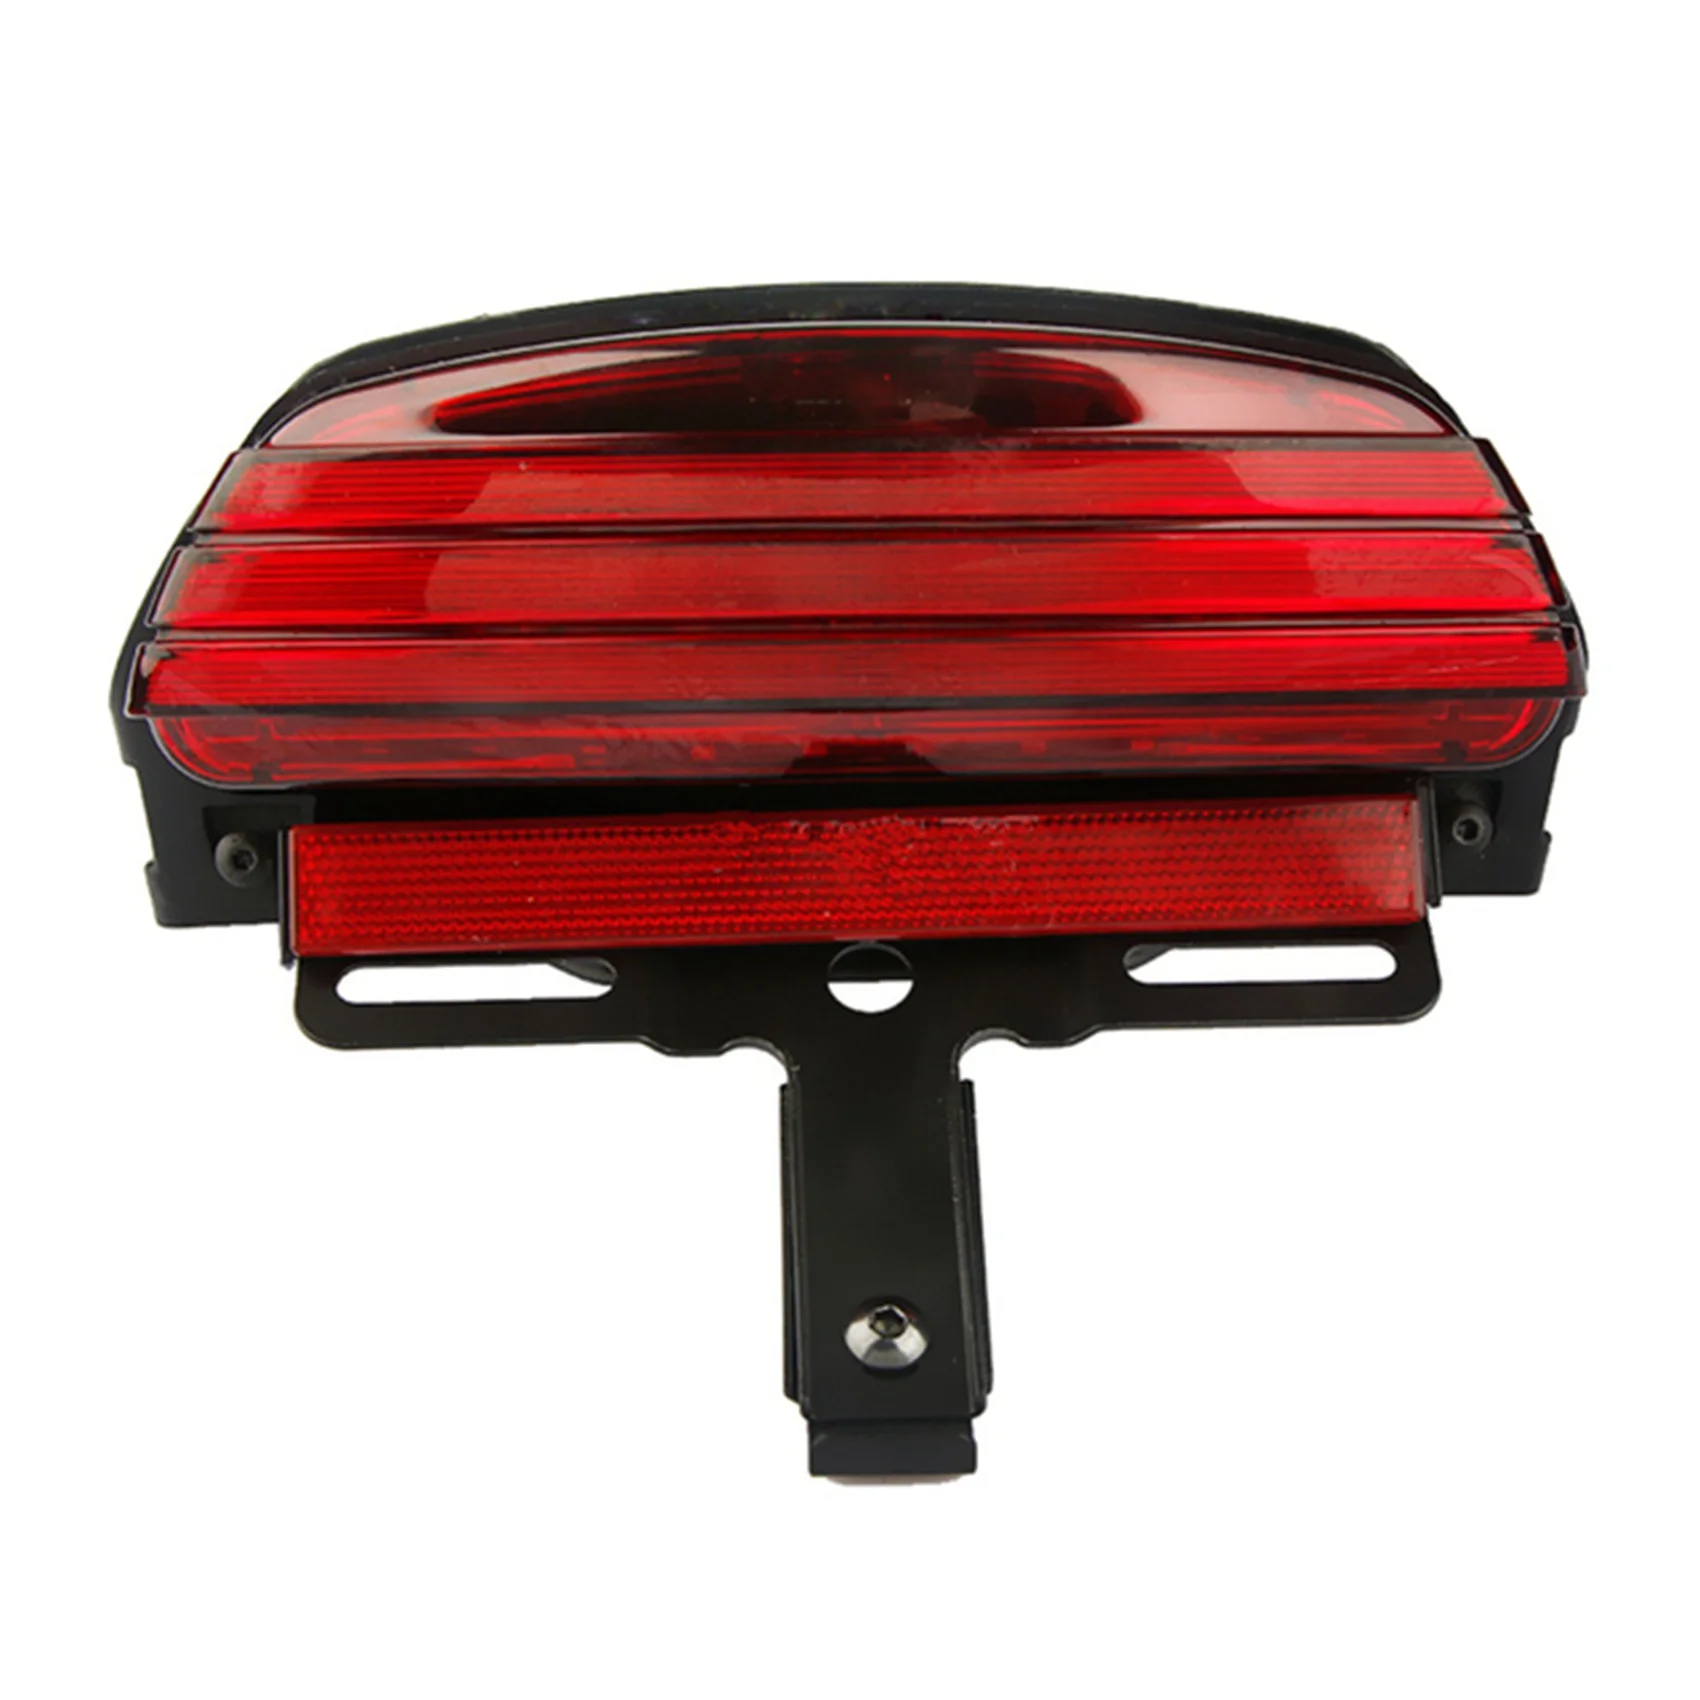 

Motorcycle Three Bar Fender LED Tail Light Brake Light for Harley Softtail Dinah Fatty Series Models 2008- Red